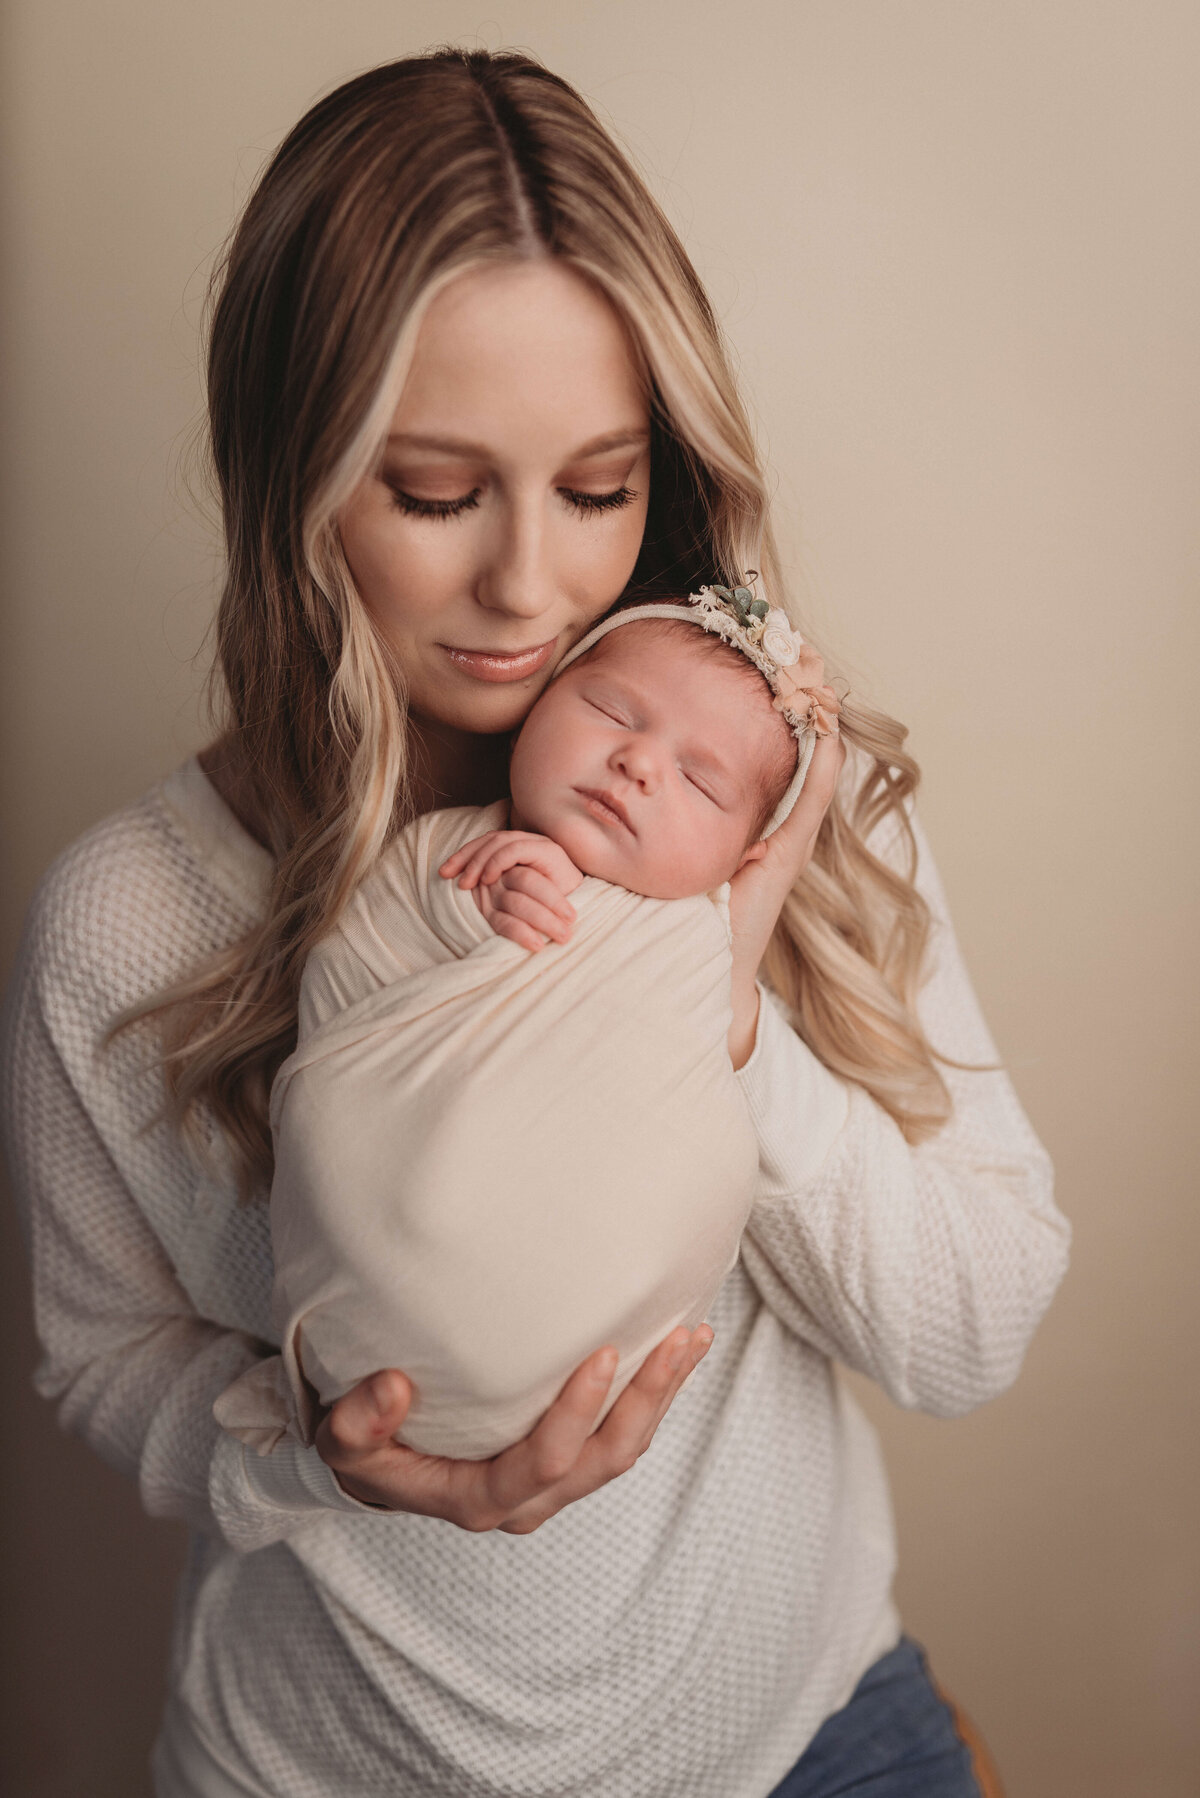 Blonde hair mom wearing white standing holding newborn baby girl close to her cheek snuggling her with closed eyes.